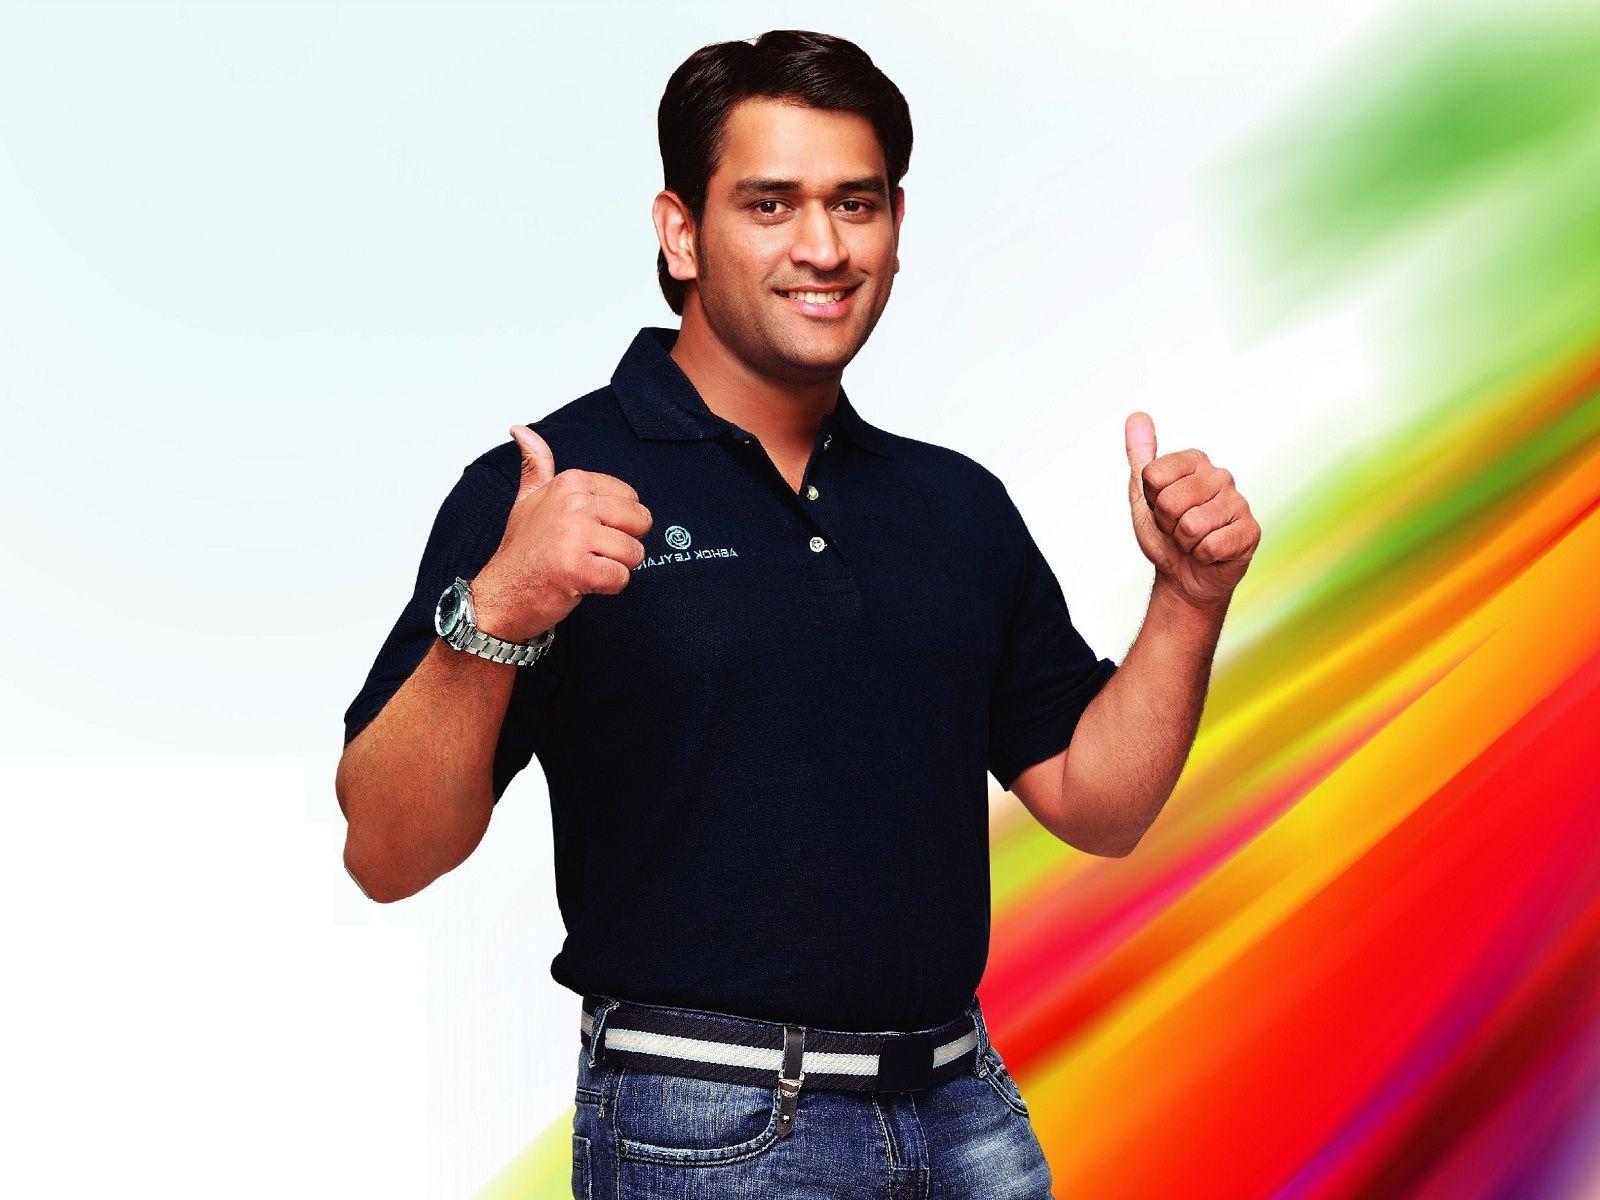 M S Dhoni Indian cricketer handsome looks. HD Wallpaper Rocks